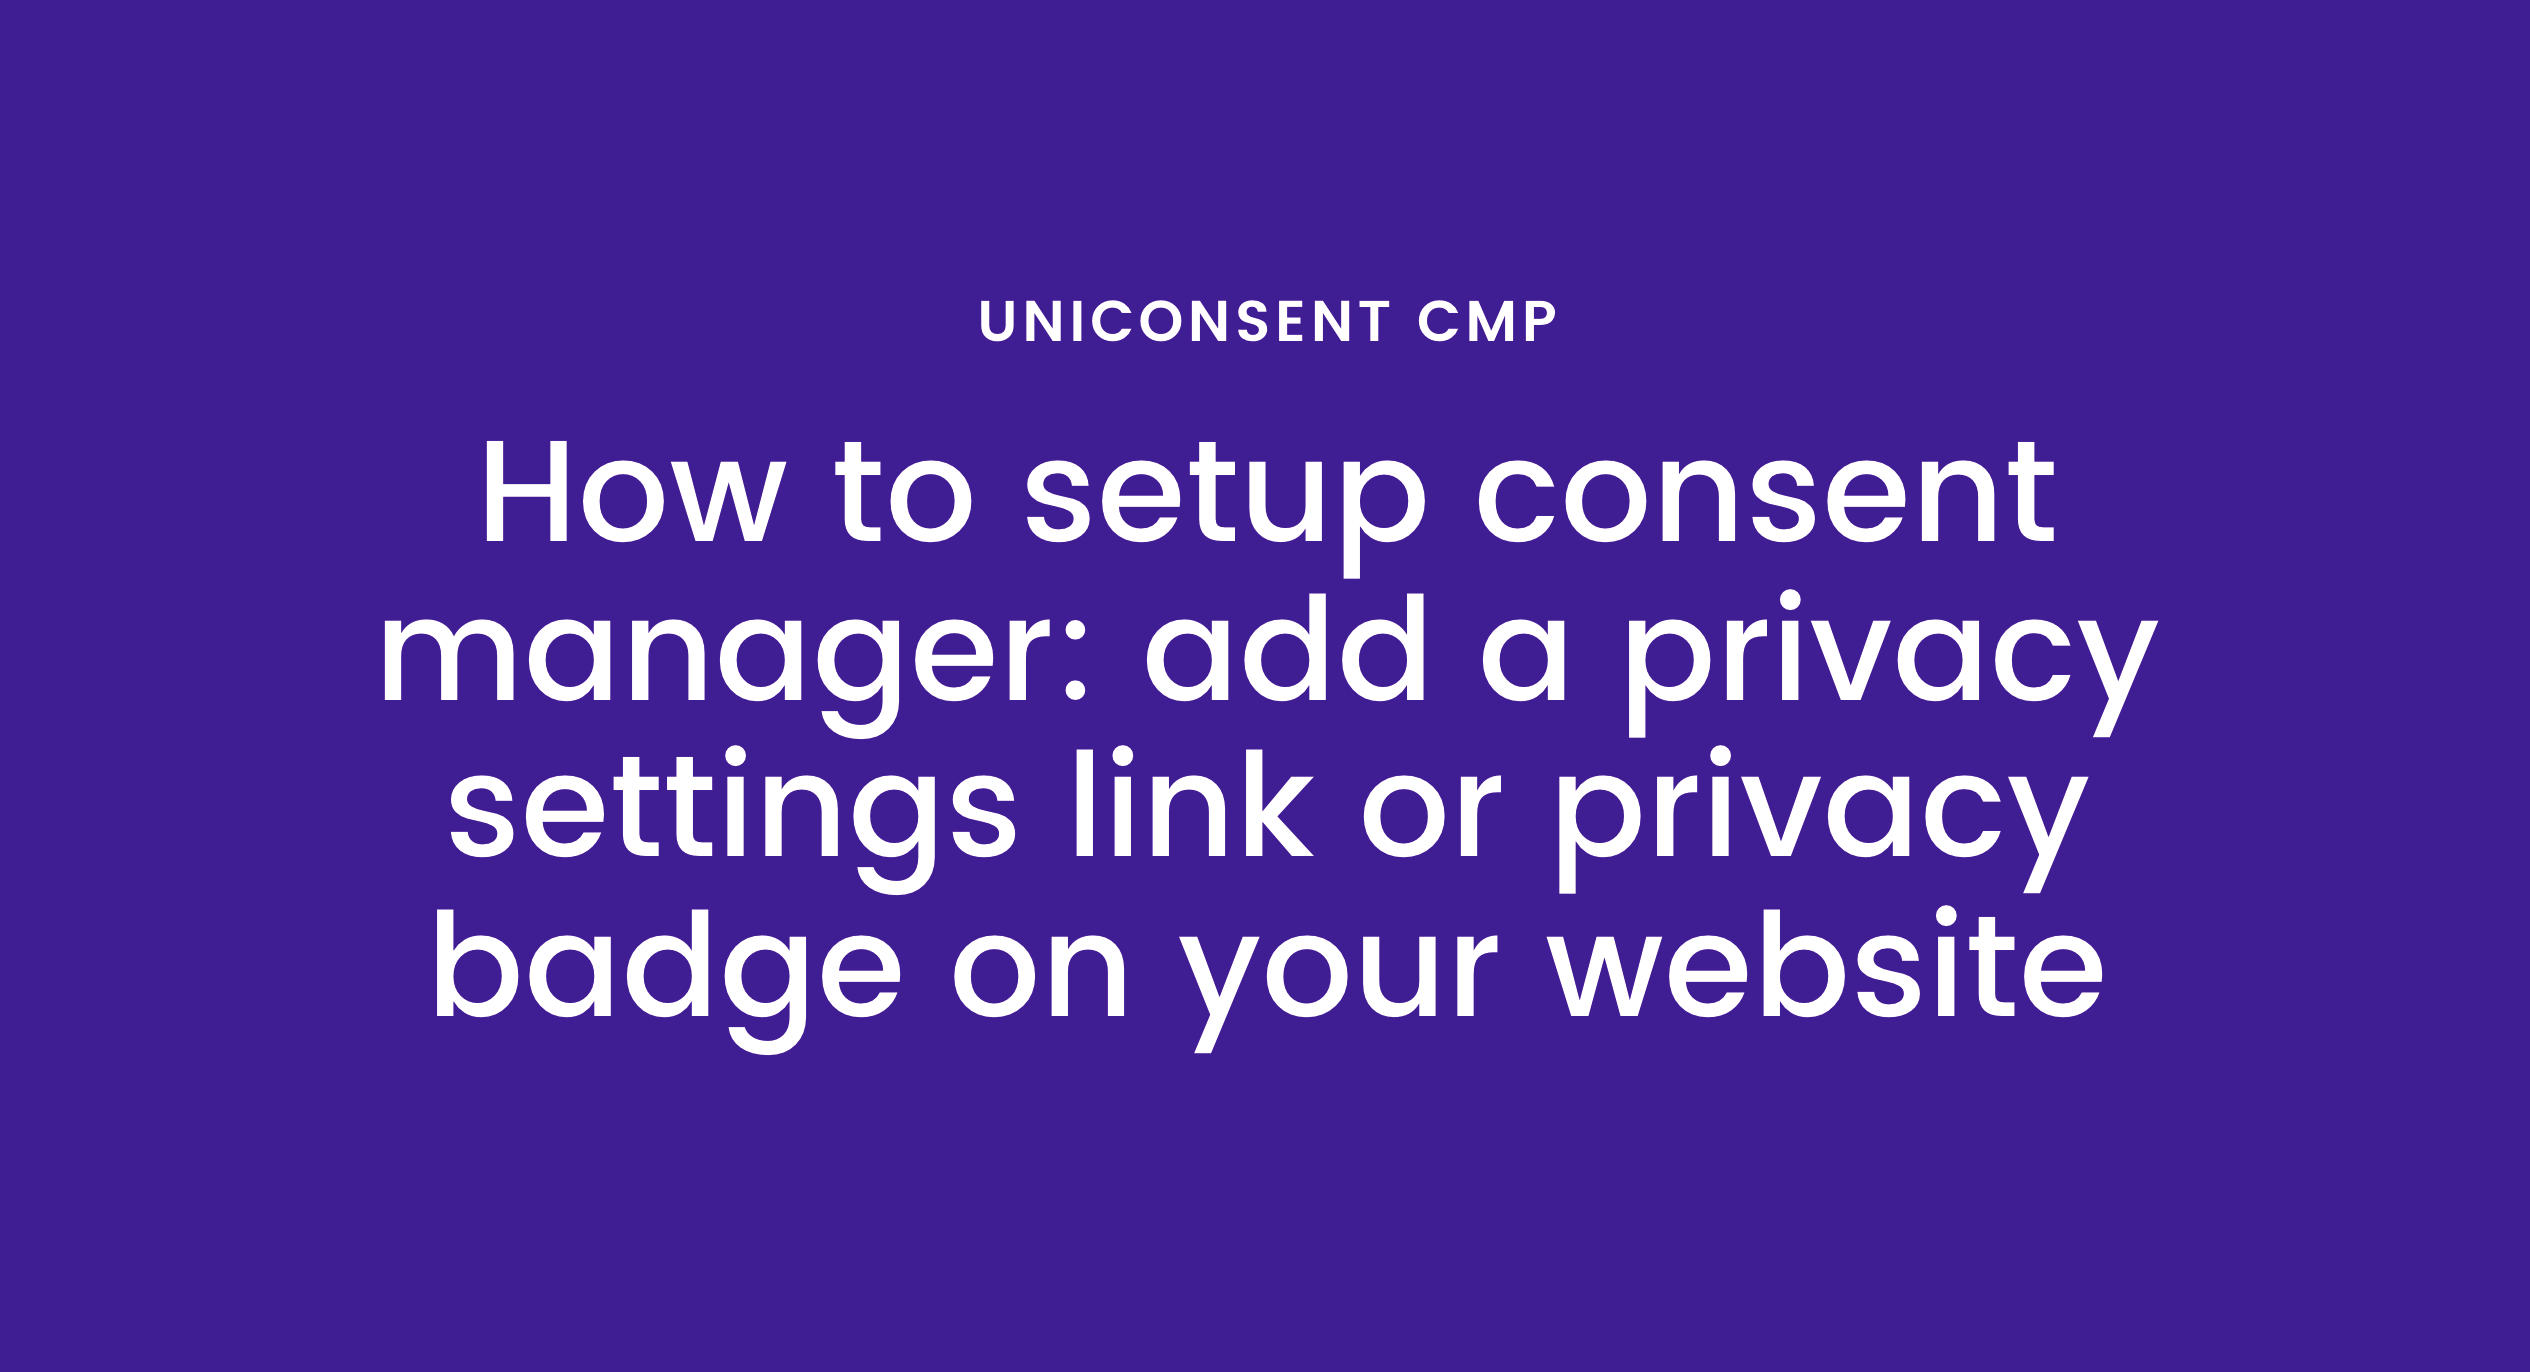 How to Setup Consent Manager: Add a Privacy Settings Link or Privacy Badge on Your Website